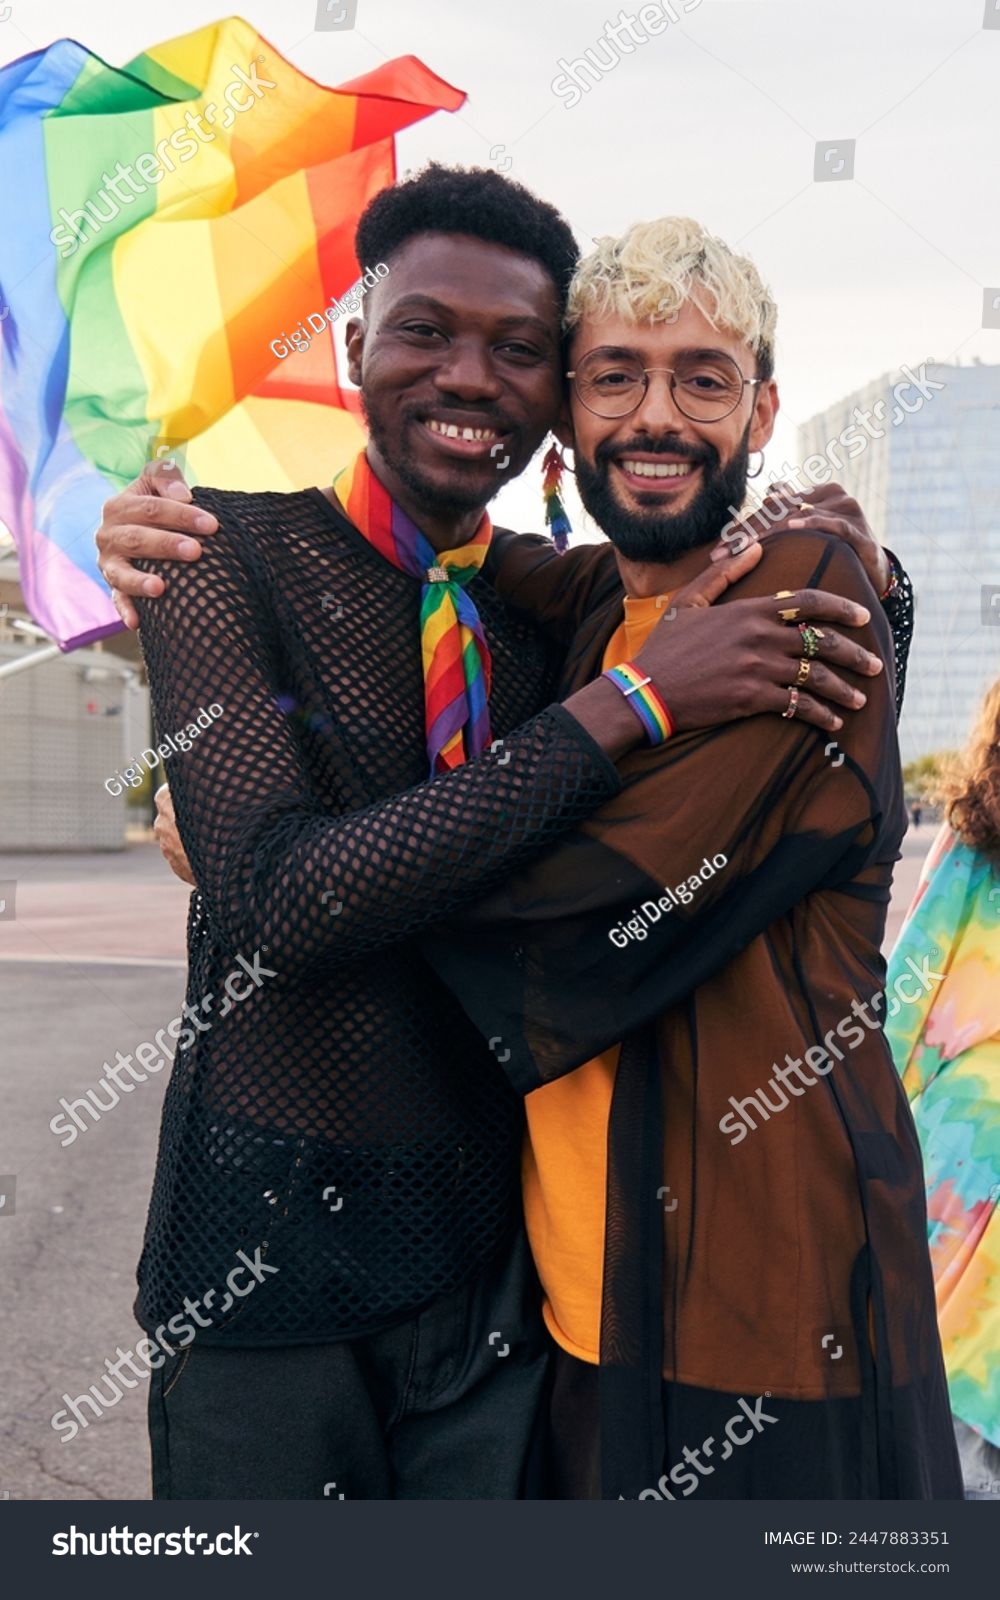 Cheerful portrait of male gay couple hugging while looking at camera smiling. Two men at pride parade celebrating the LGBTQIA month. Vertical photo with copy space. #2447883351